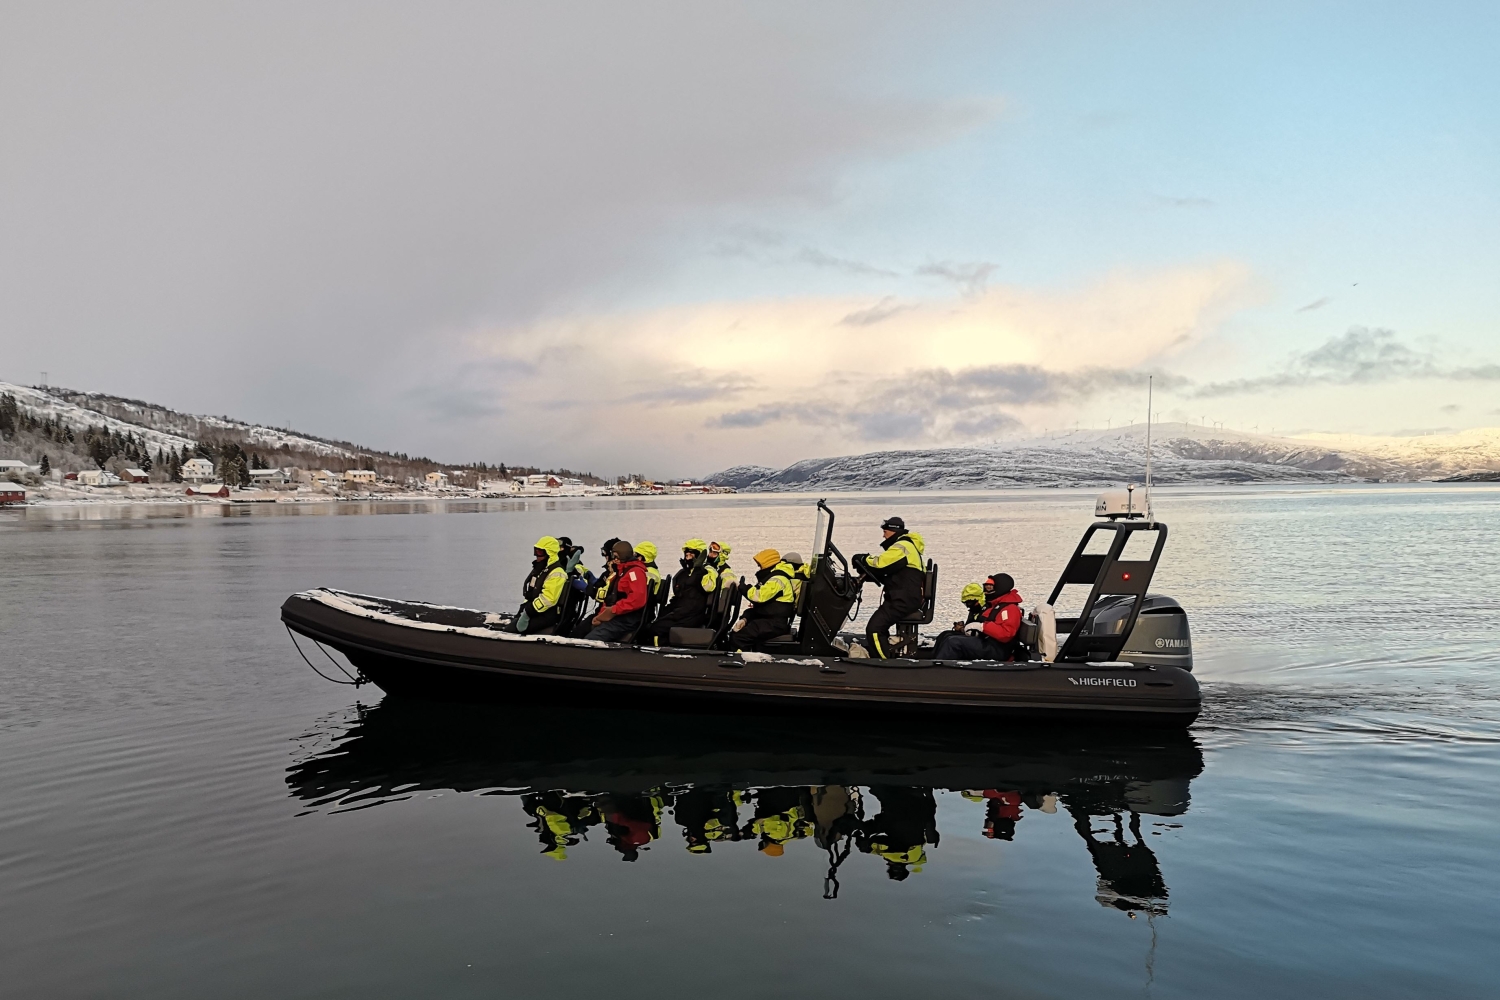 Arctic fjordcruise by car and boat to Sommarøy in a small group